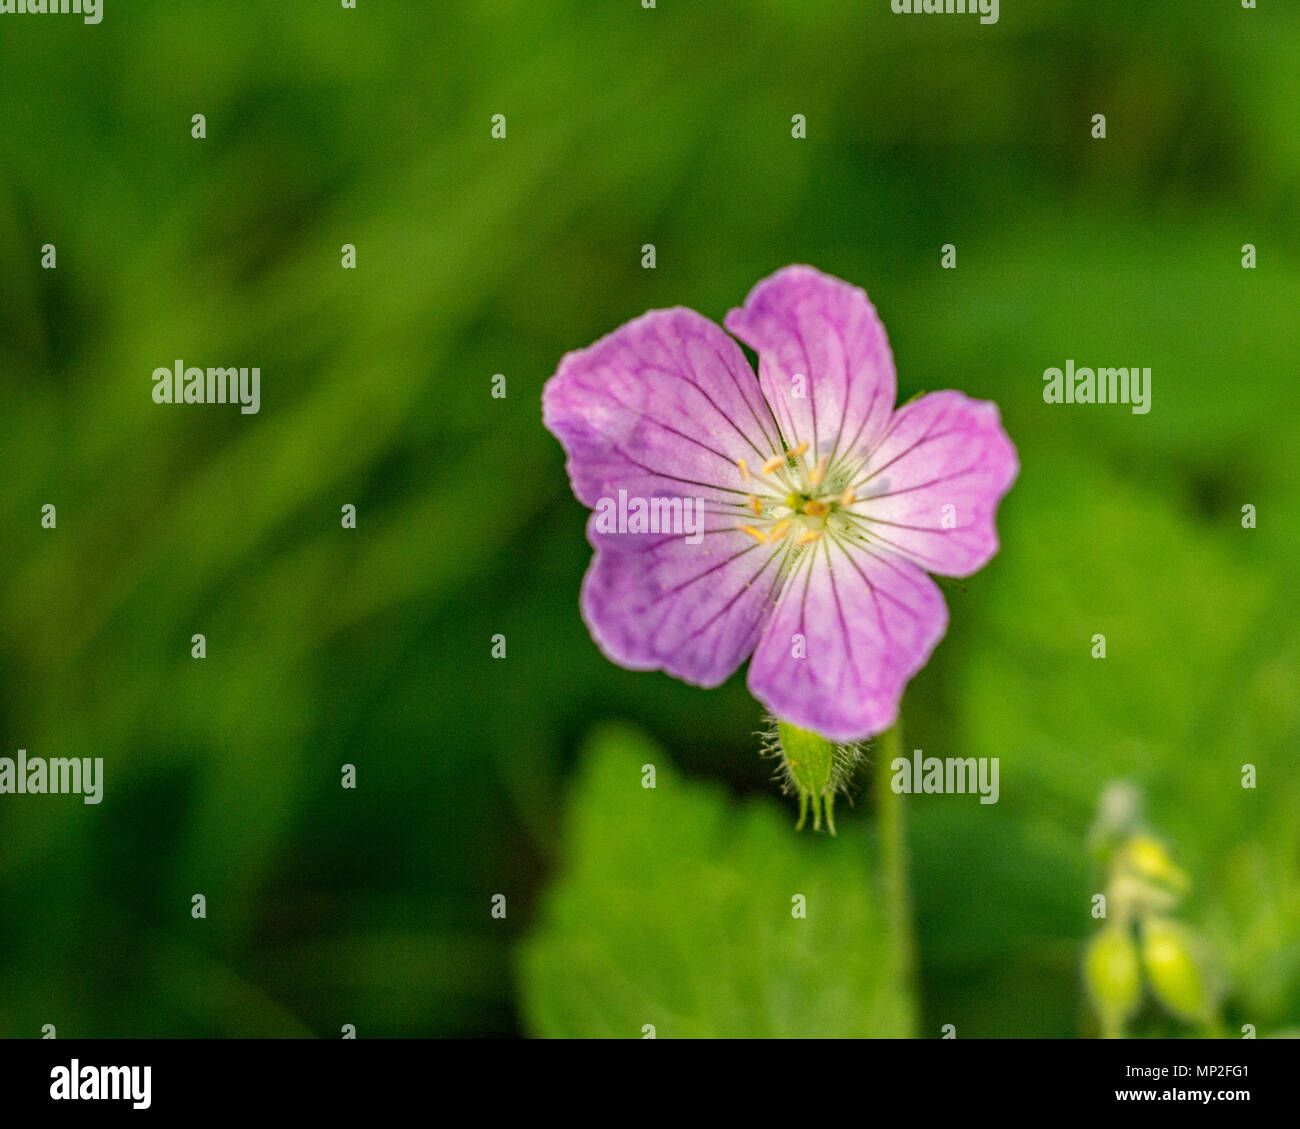 Geranium wild flower in perfect sunlight during spring in the Midwest. Stock Photo